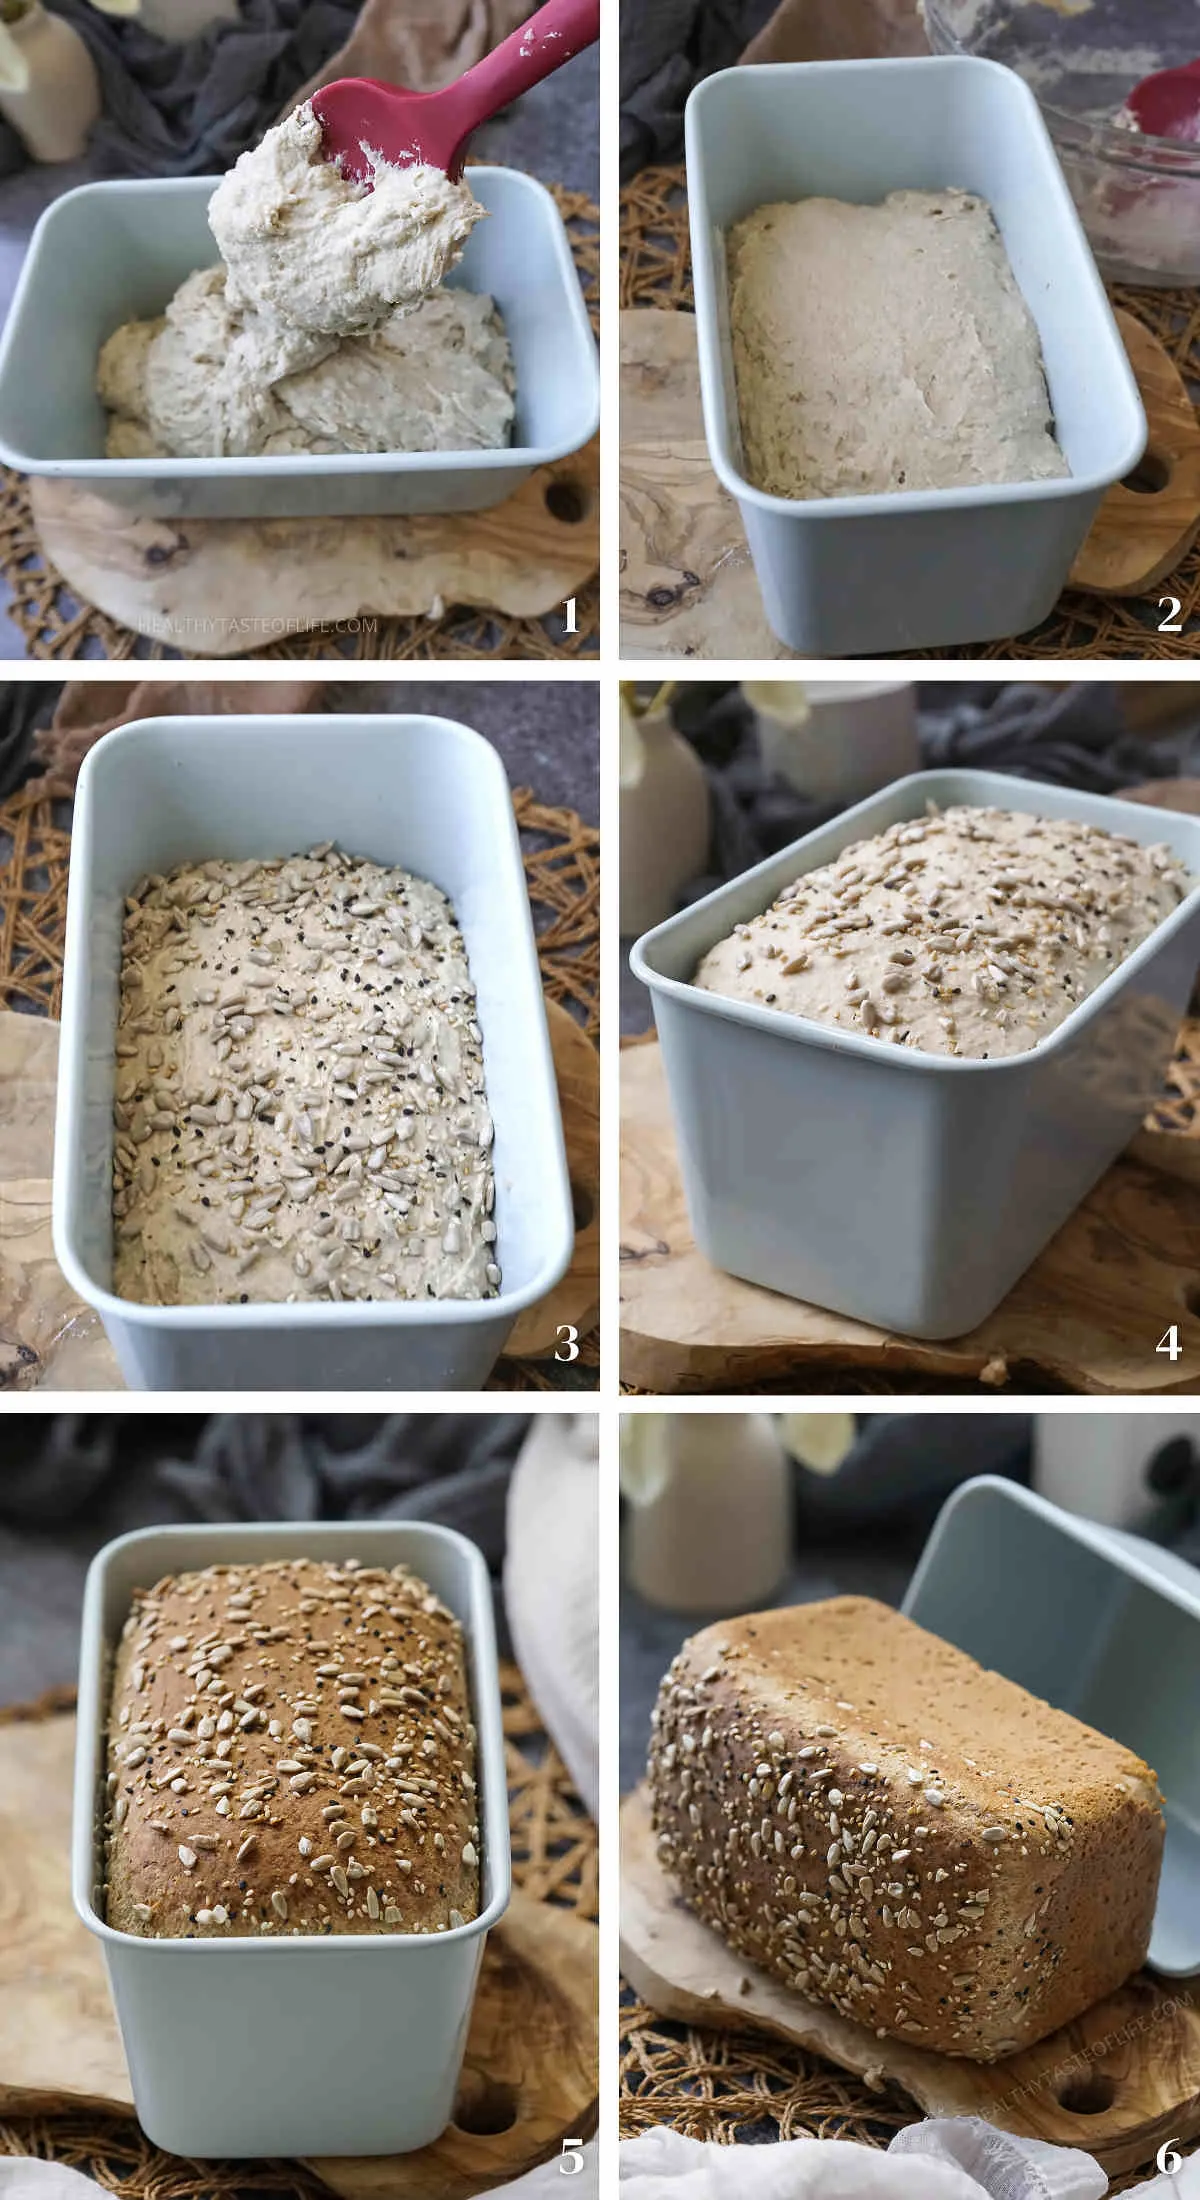 Process shots showing how to work with the dough and bake the gluten free buckwheat flour bread.